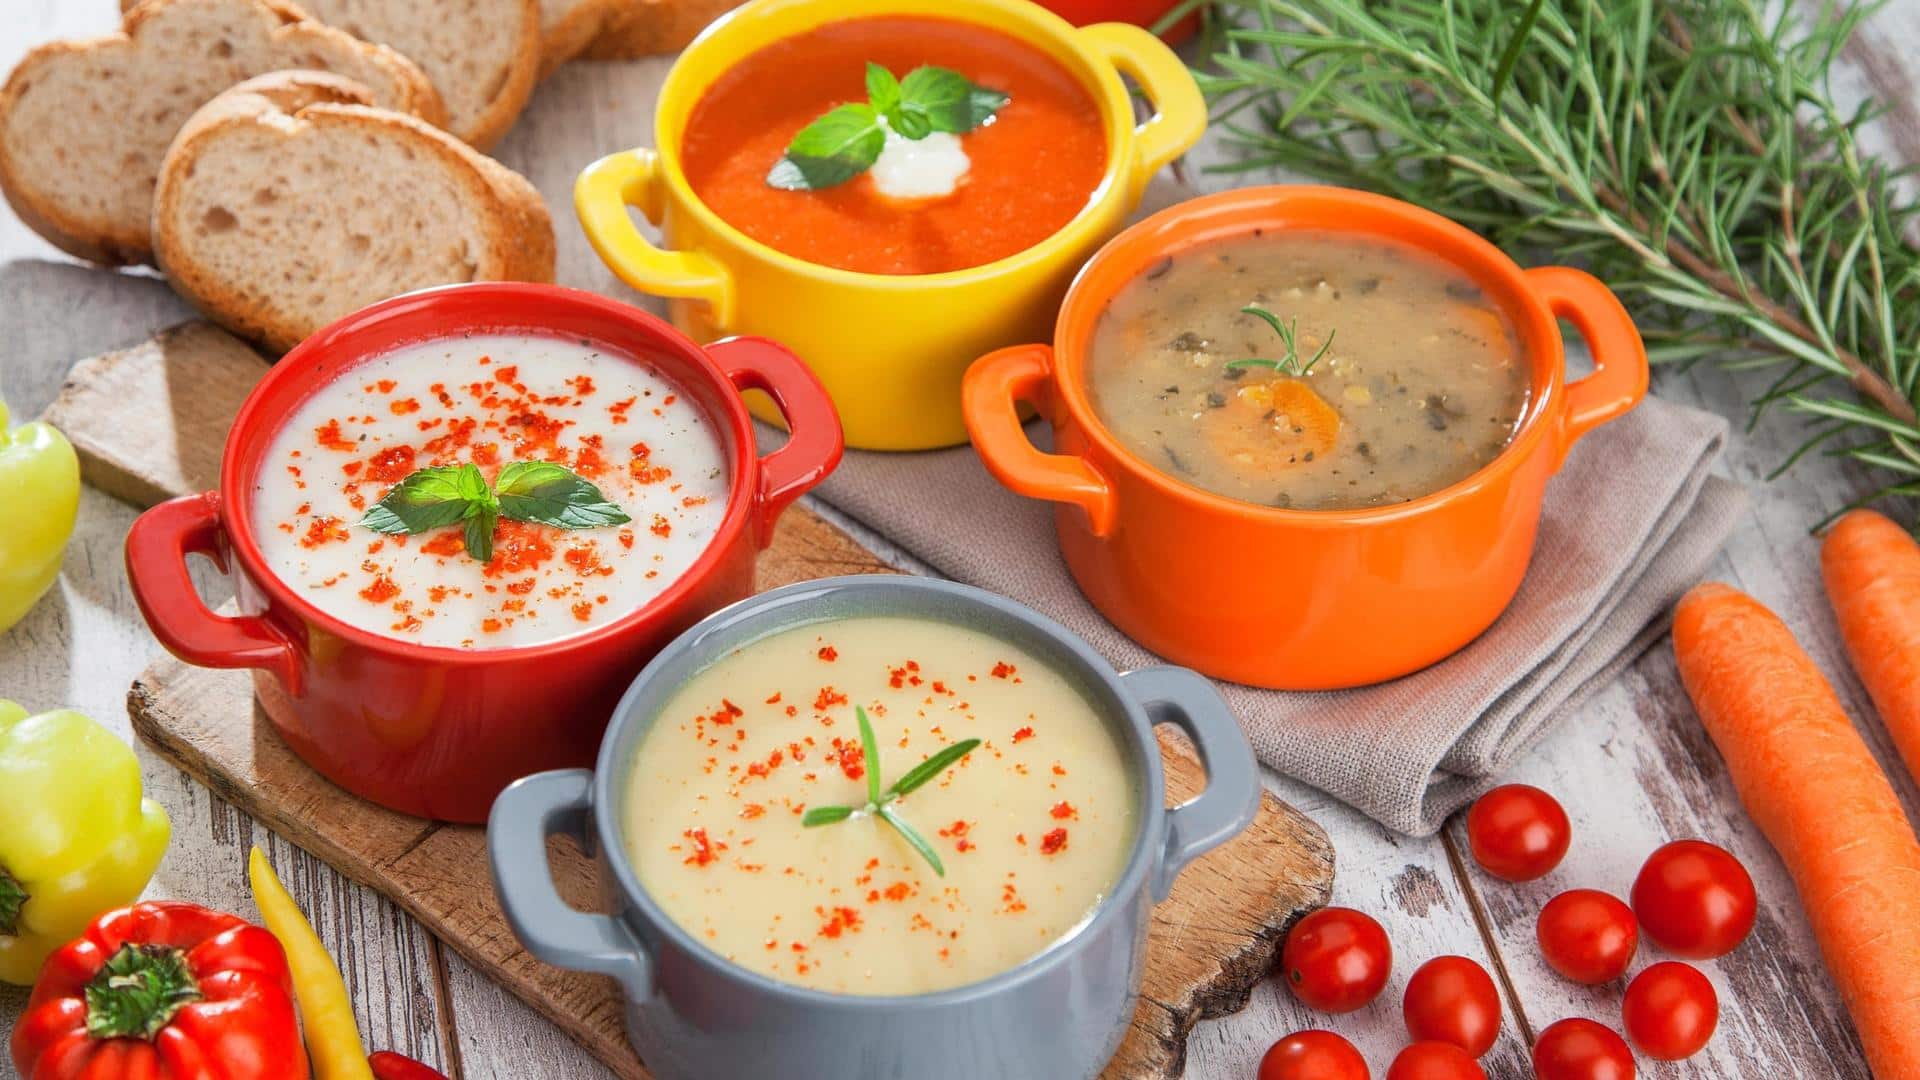 Soupy goodness: Try these five lip-smacking soups this winter